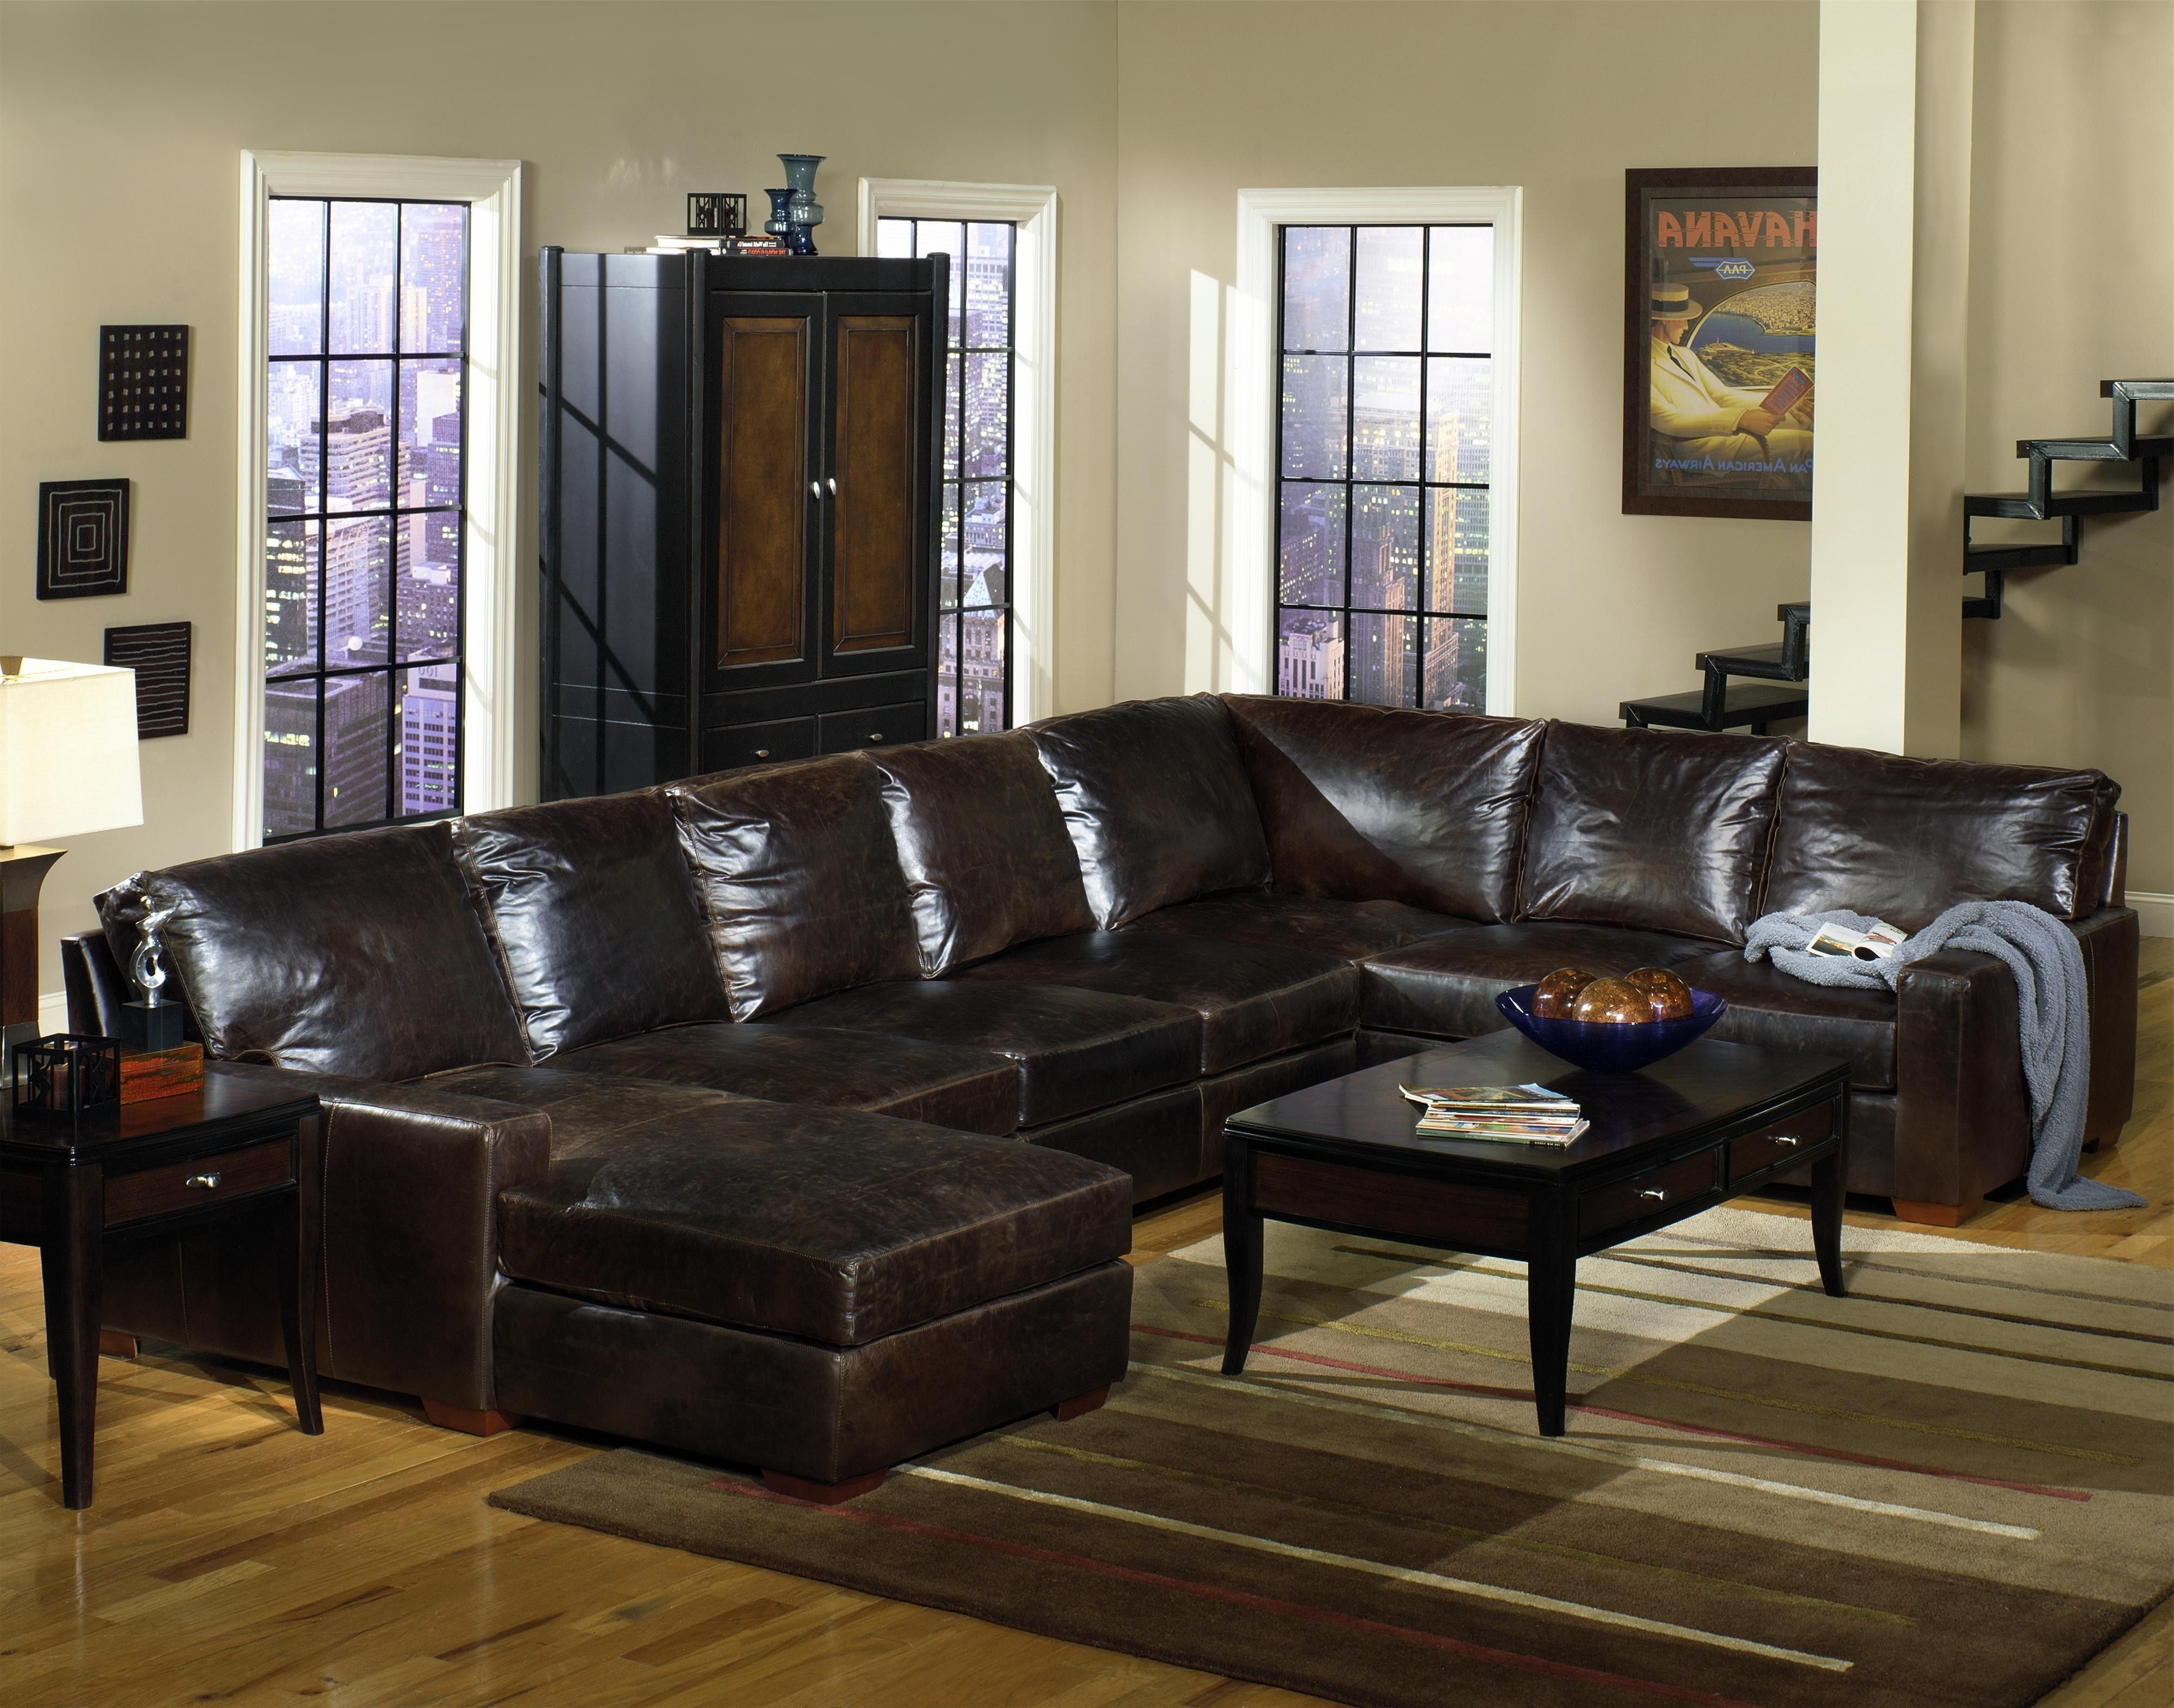 Usa Premium Leather 9935 Track Arm Sofa Chaise Sectional Intended For Popular Leather Chaise Sectionals (View 4 of 15)